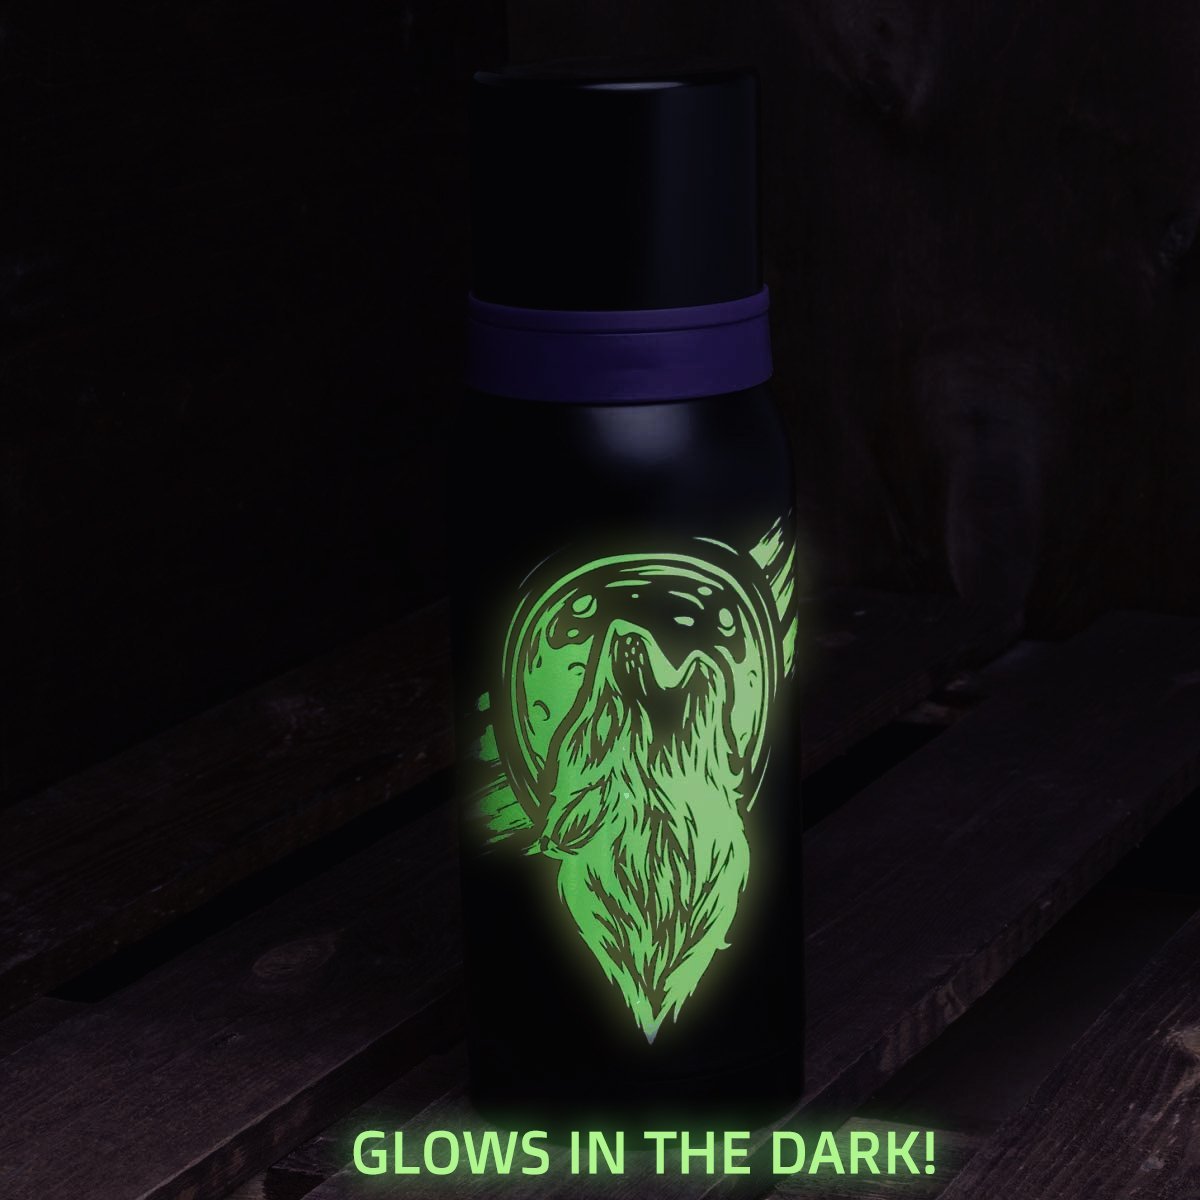 The wolf print on a Big Stainless Steel Water Flask glows in the dark